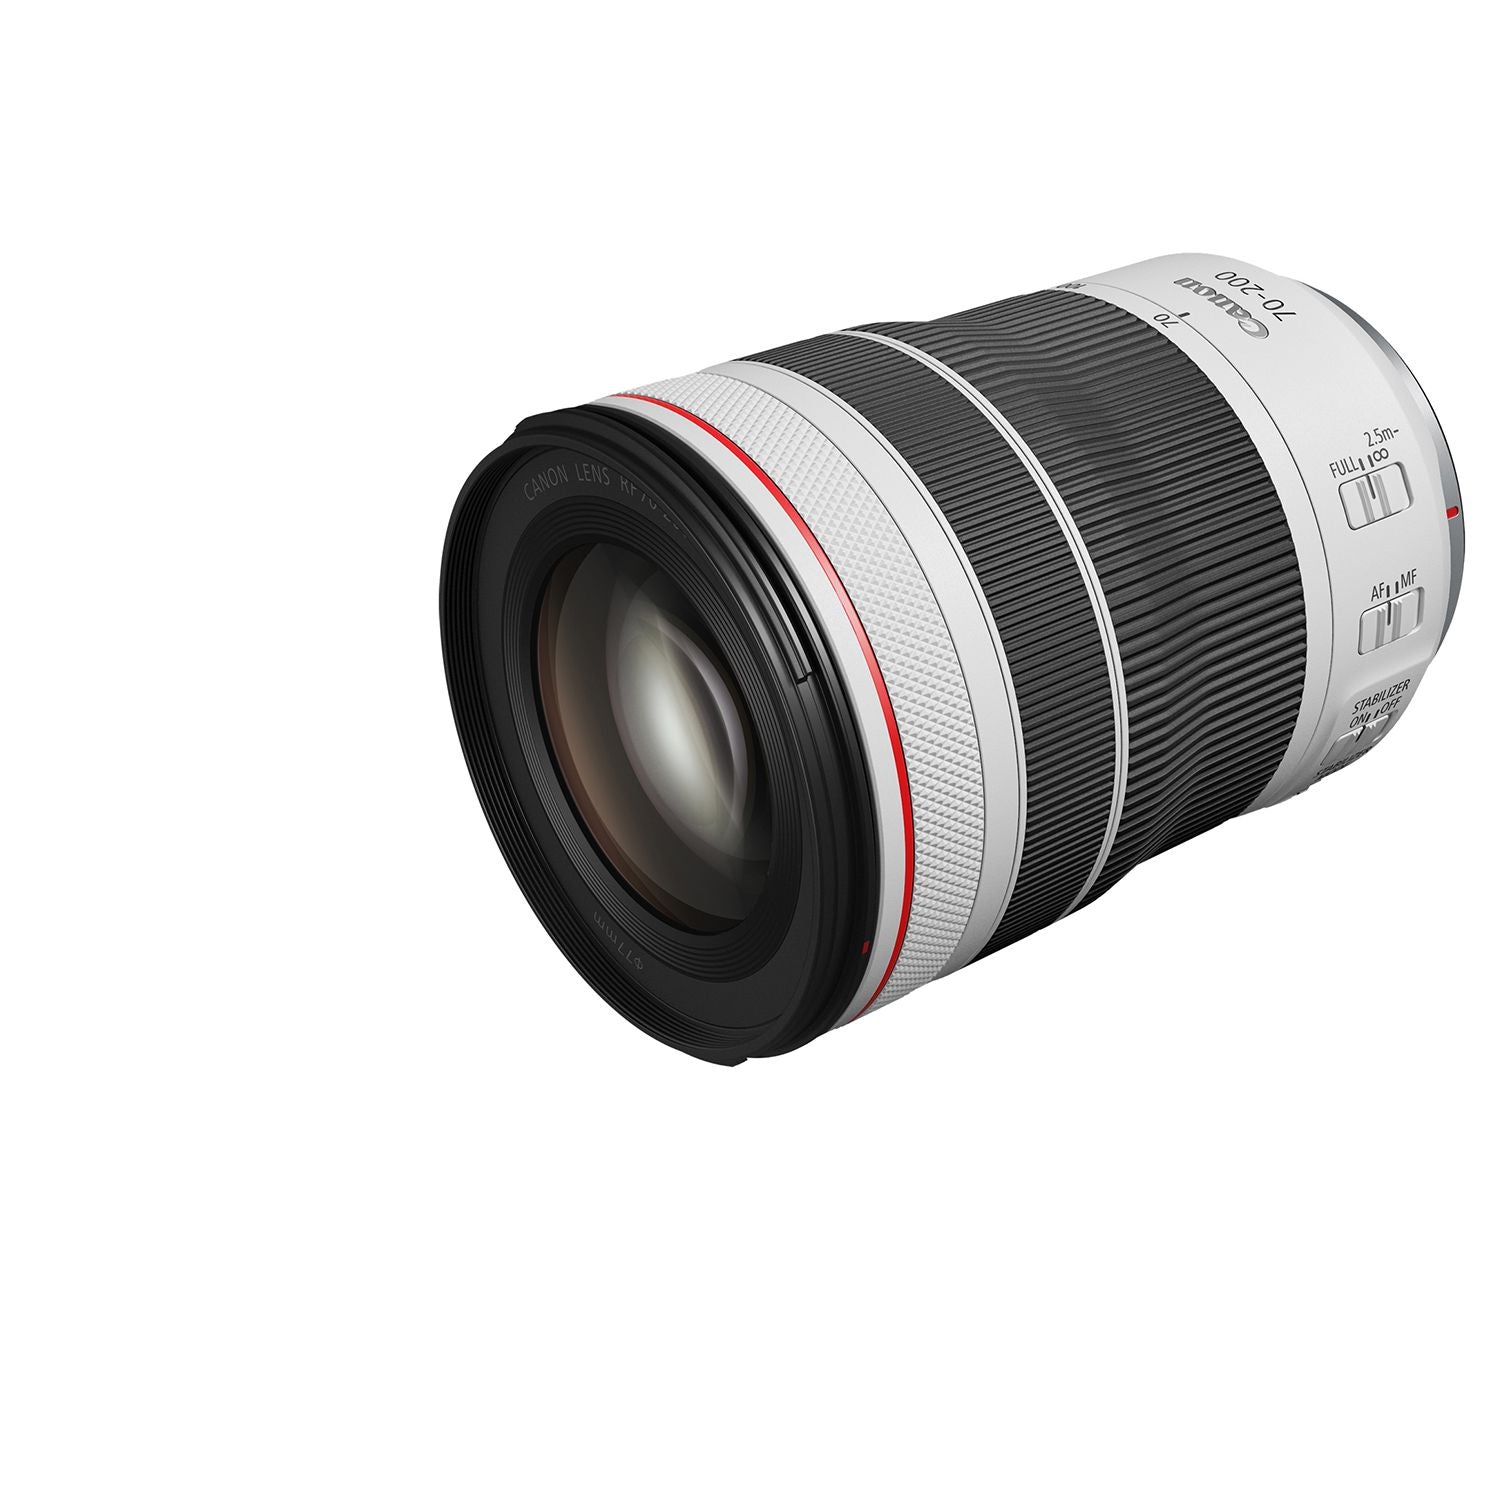 Canon RF 70-200mm f4 IS